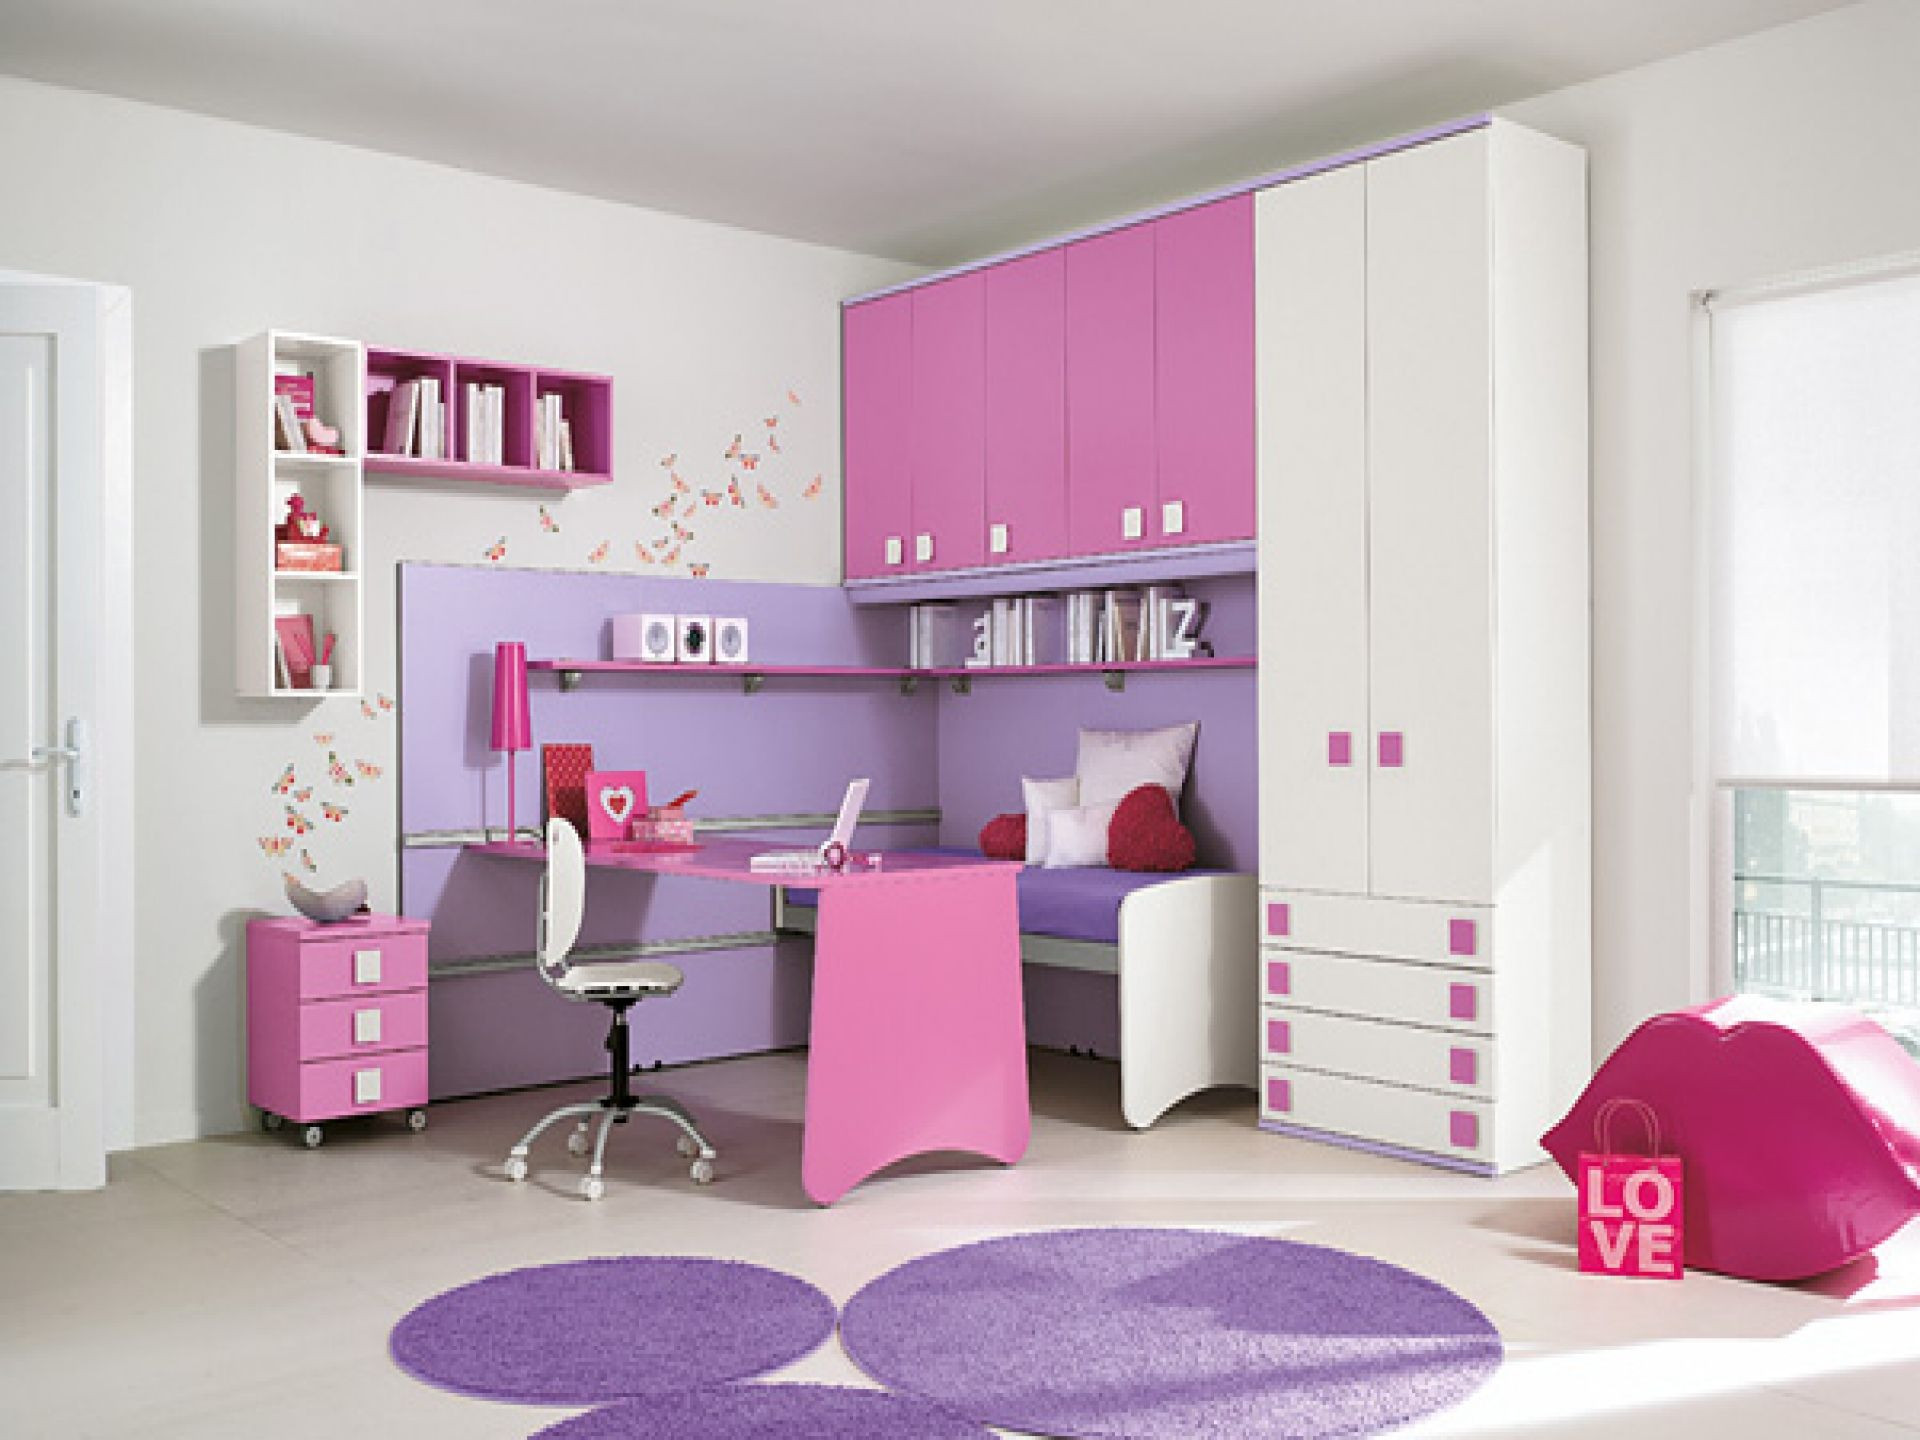 Pink And Purple Kids Room
 Captivating pink and purple bedroom decor idea with pink